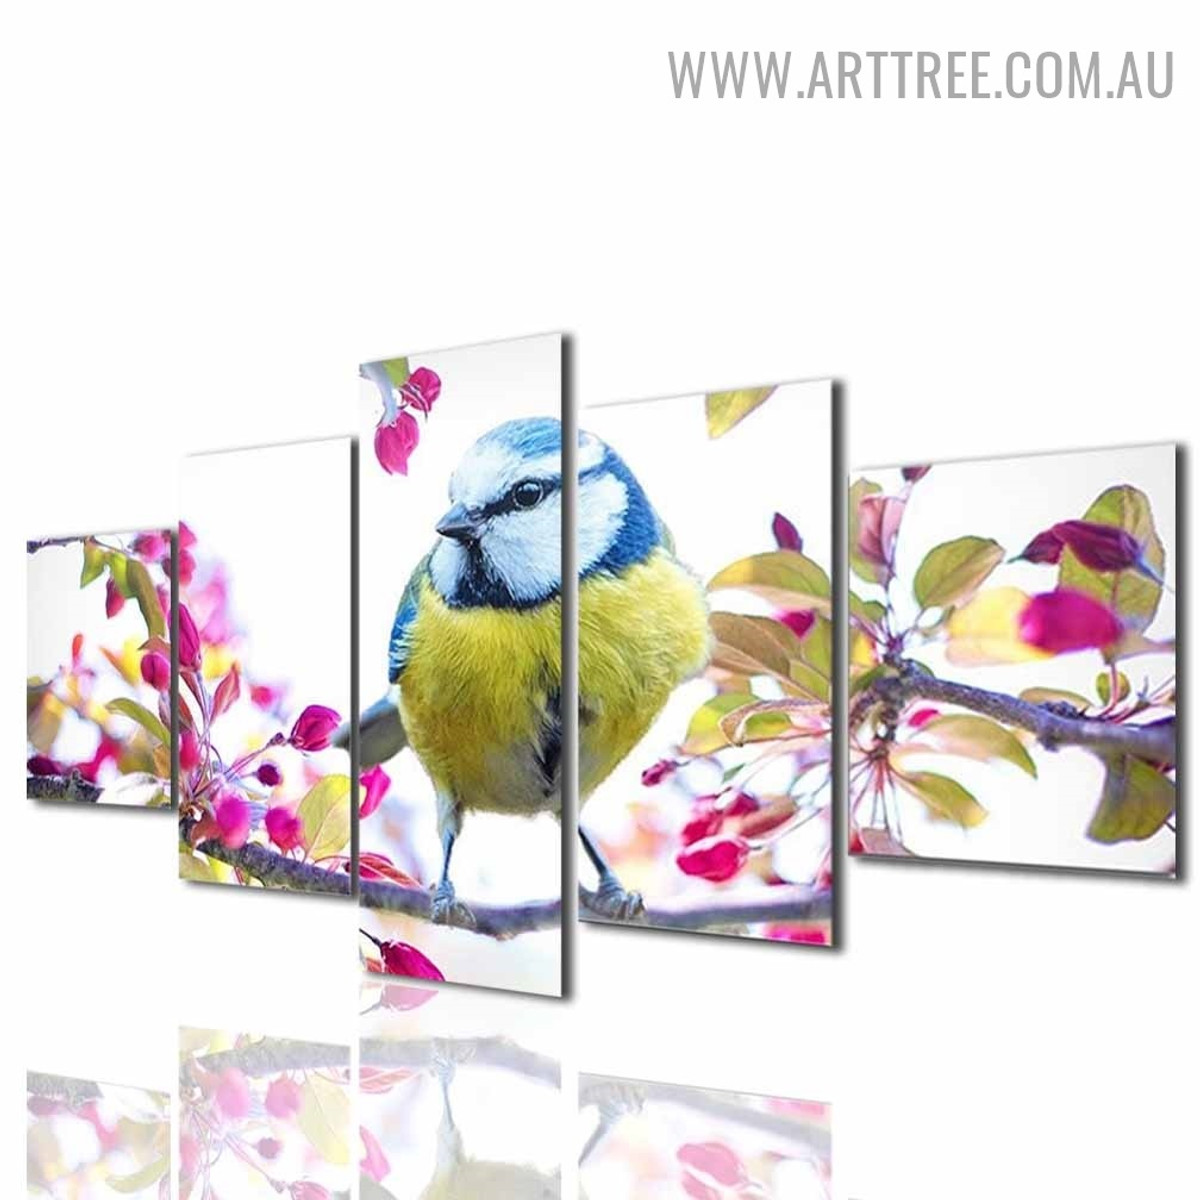 Colourful Bird Flowers Modern Floral 5 Piece Split Painting Image Canvas Print for Room Wall Decor